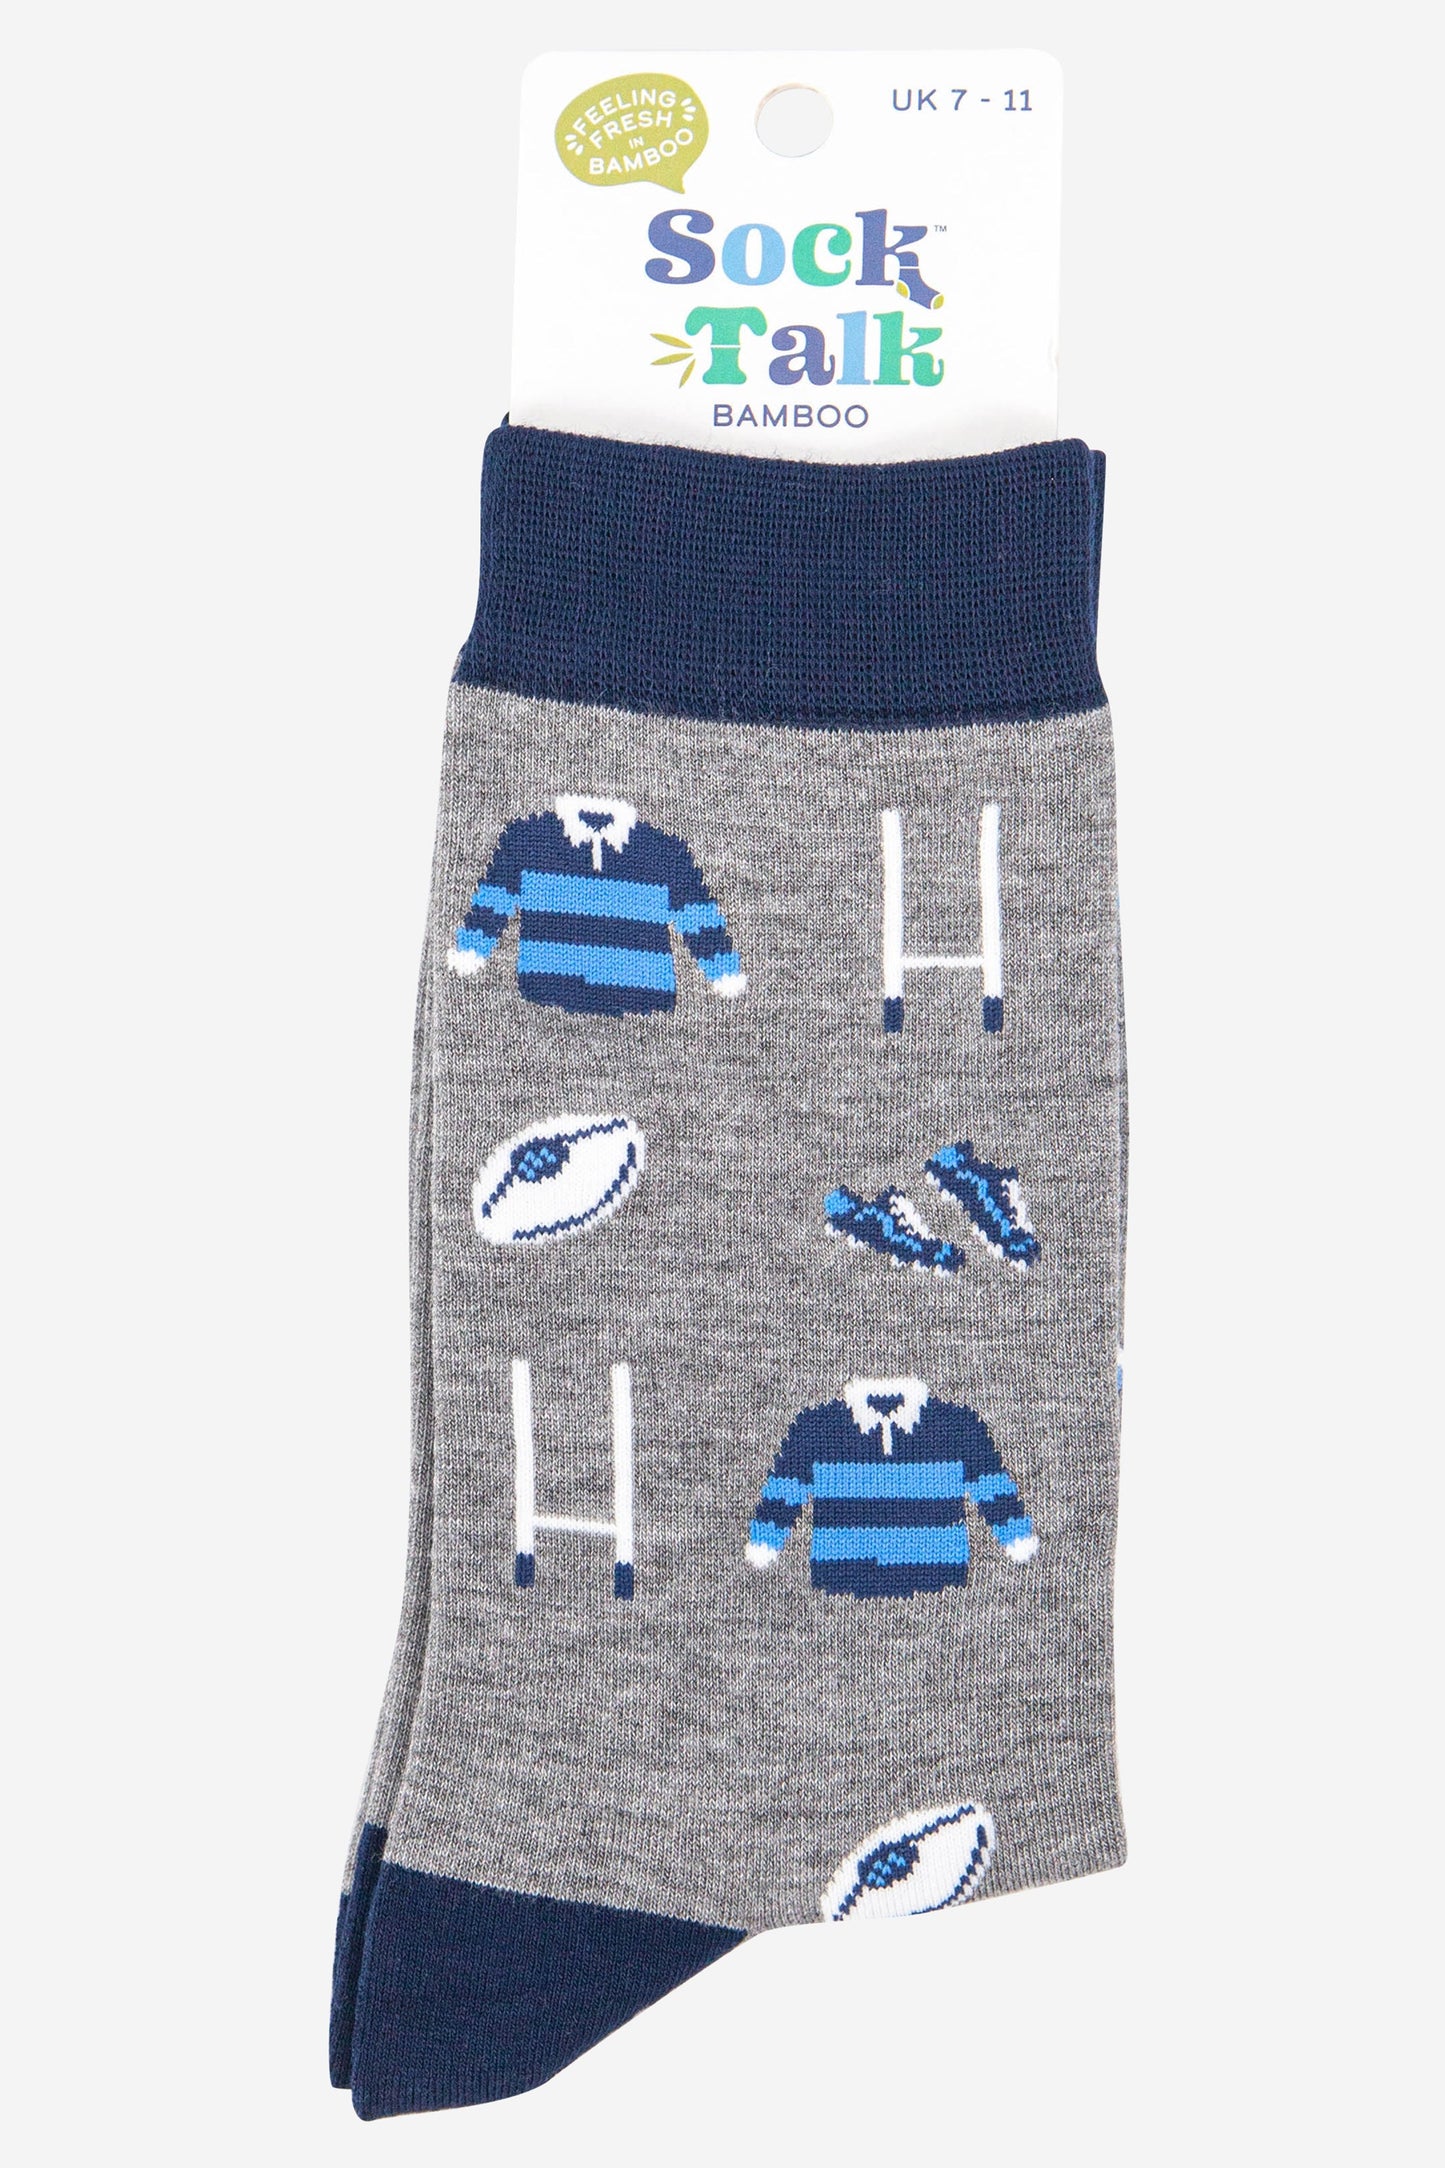 mens rugby team bamboo dress socks in grey and navy blue uk size 7-11